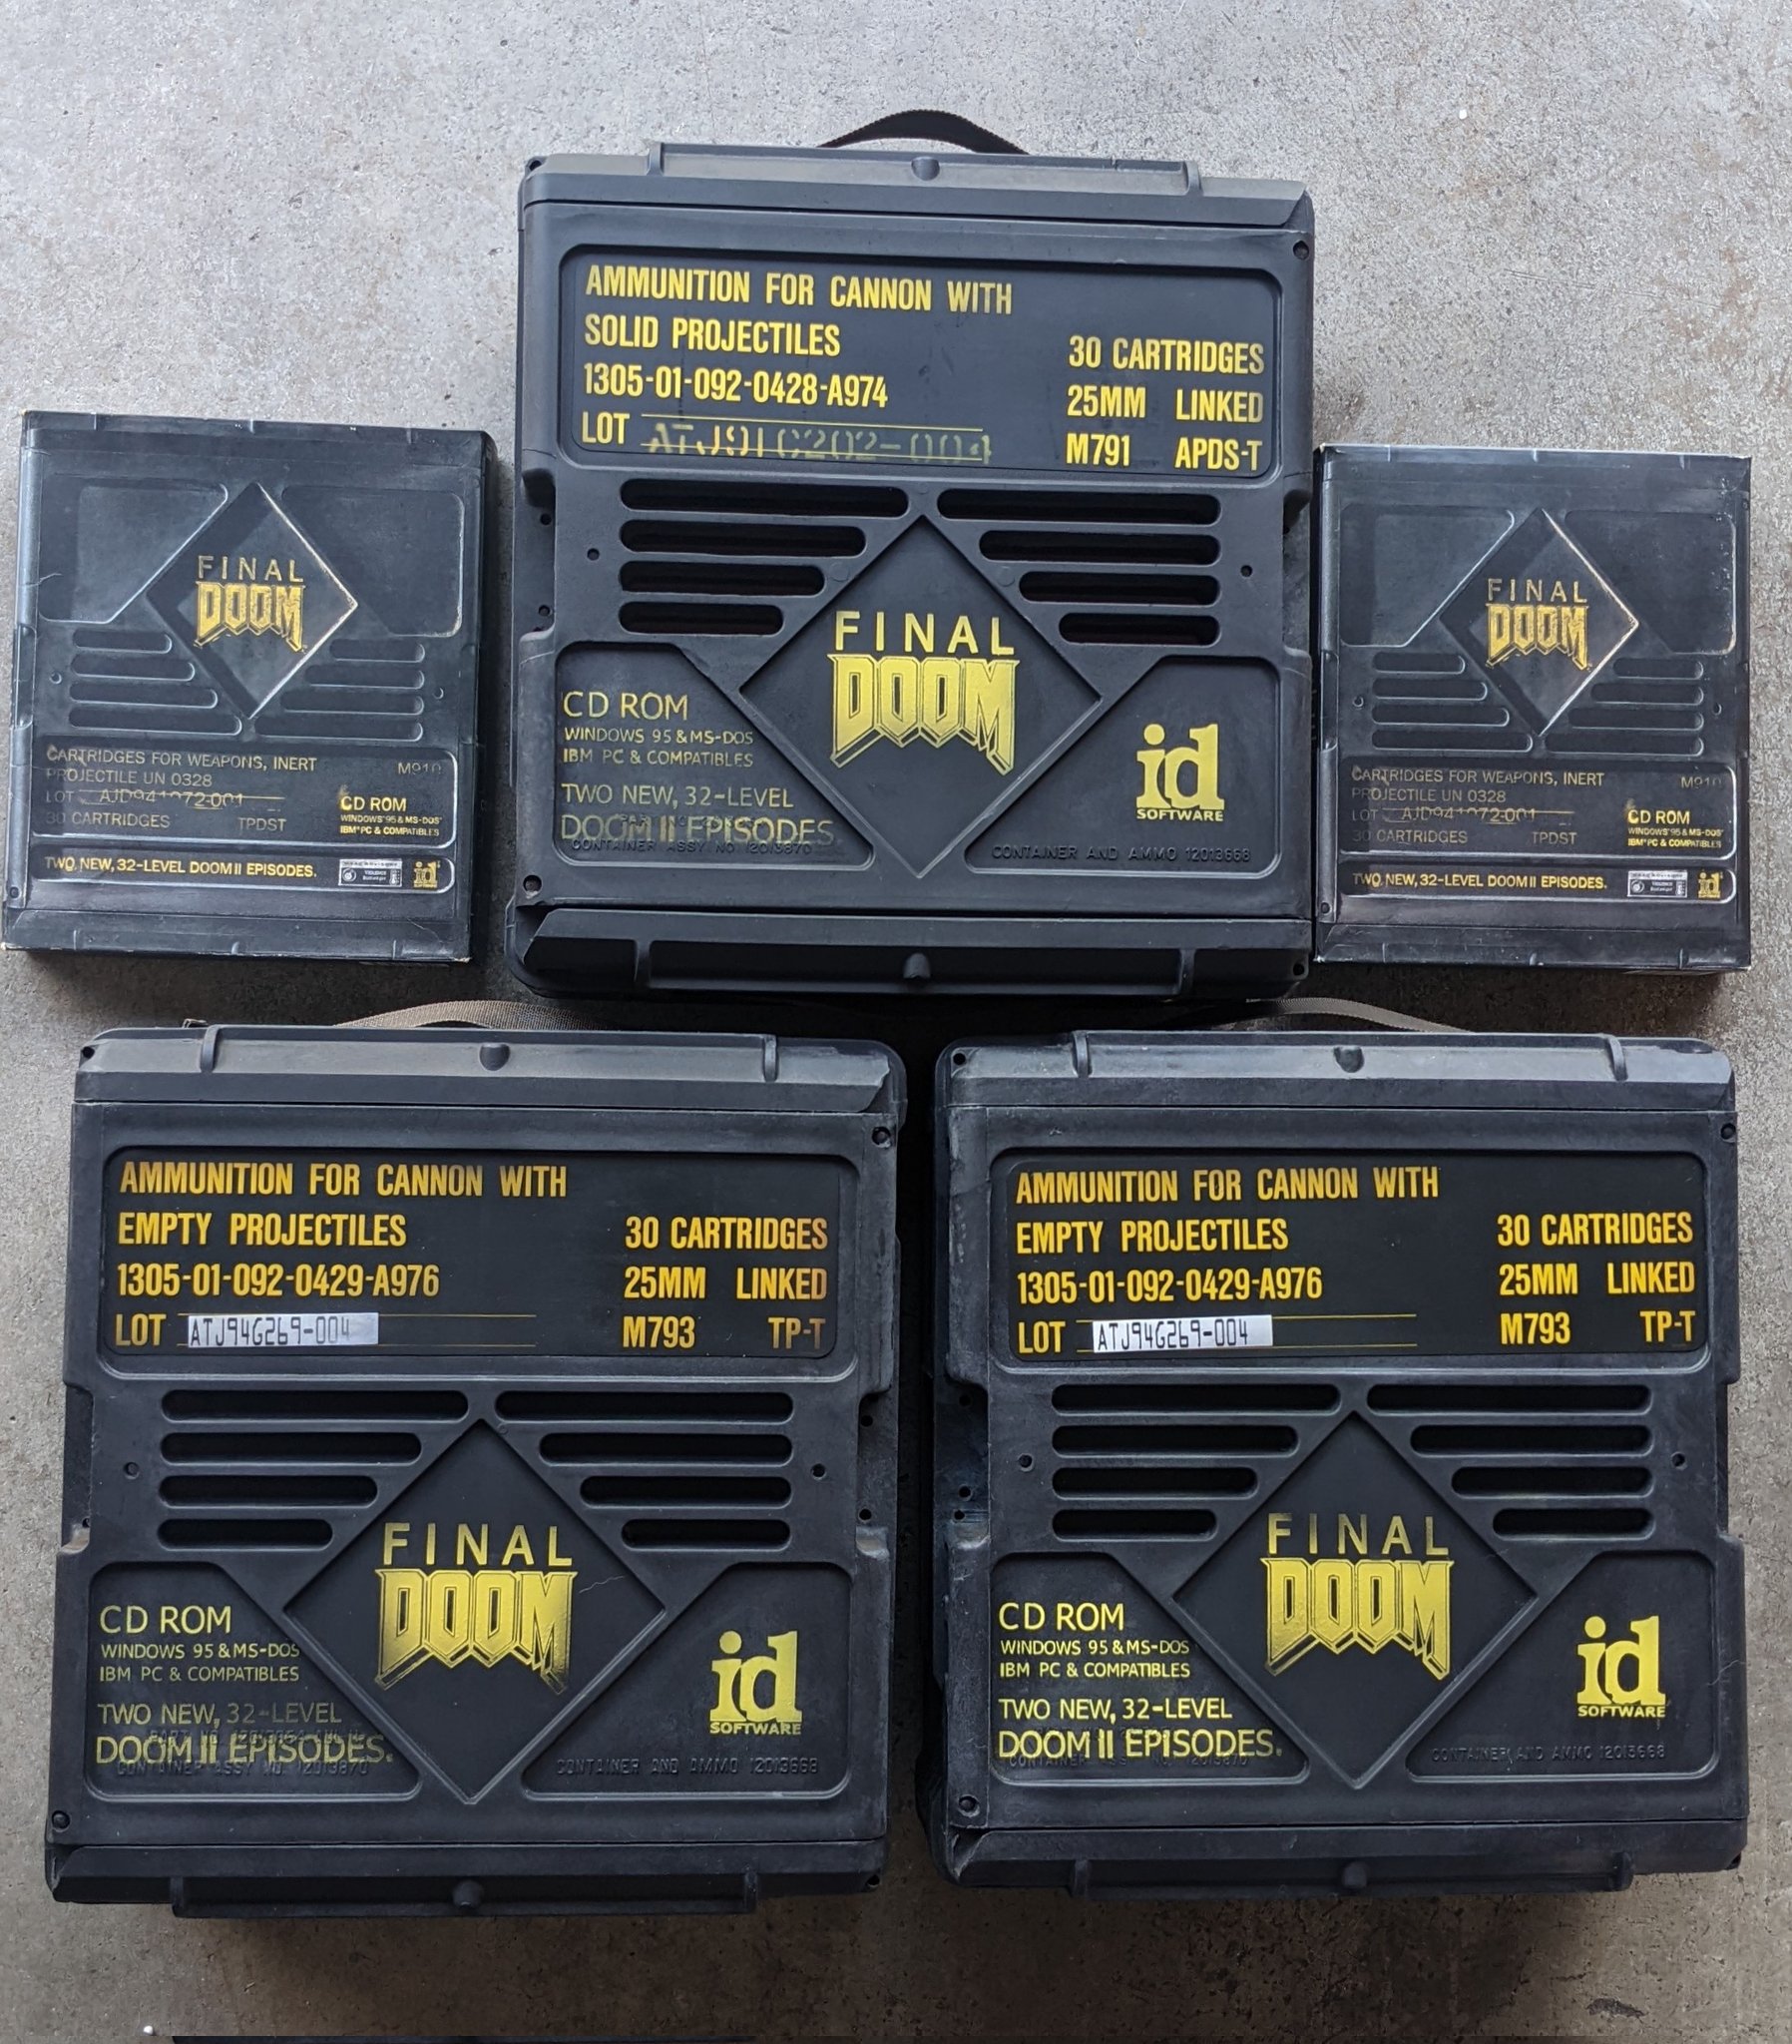 Stephen Kick on Twitter: "These final @doom ammo crates will be available  for sale soon! The top one has acrylic in the slots and it glows red!  https://t.co/ktT7X70NJZ" / Twitter